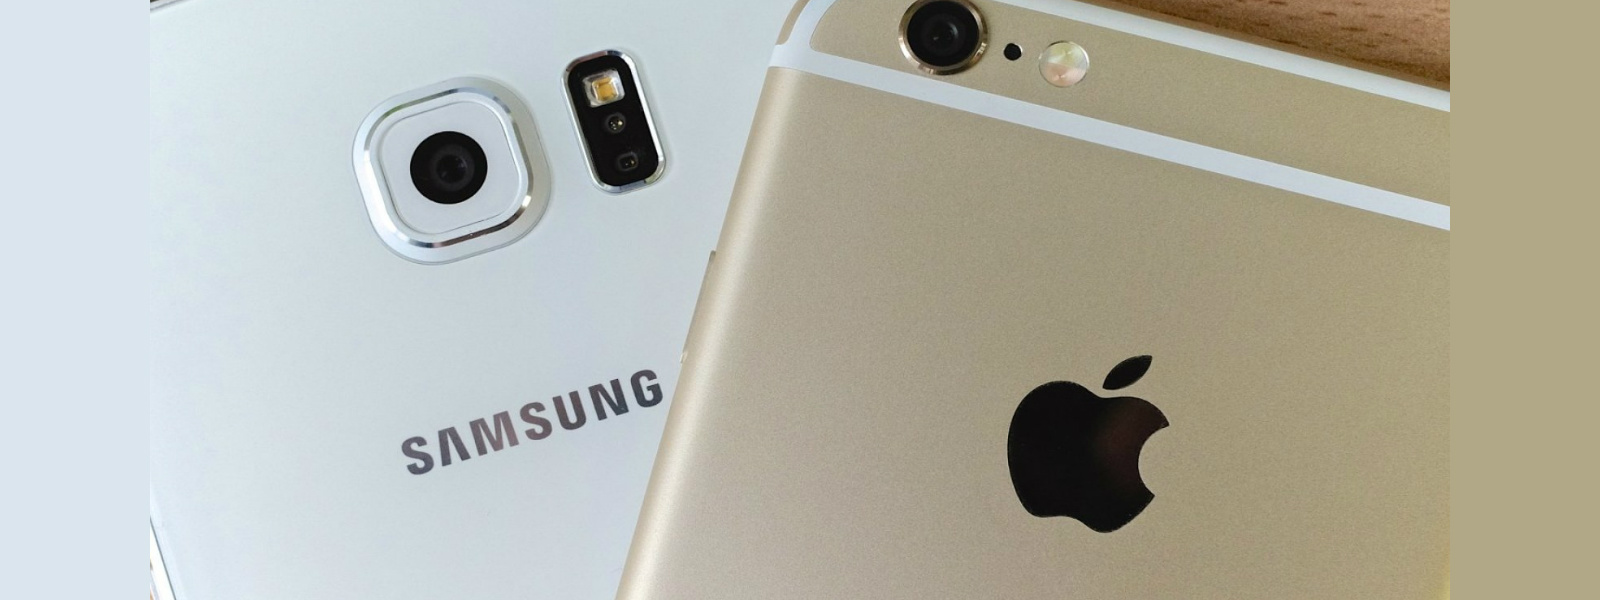 Apple awarded $539m from Samsung